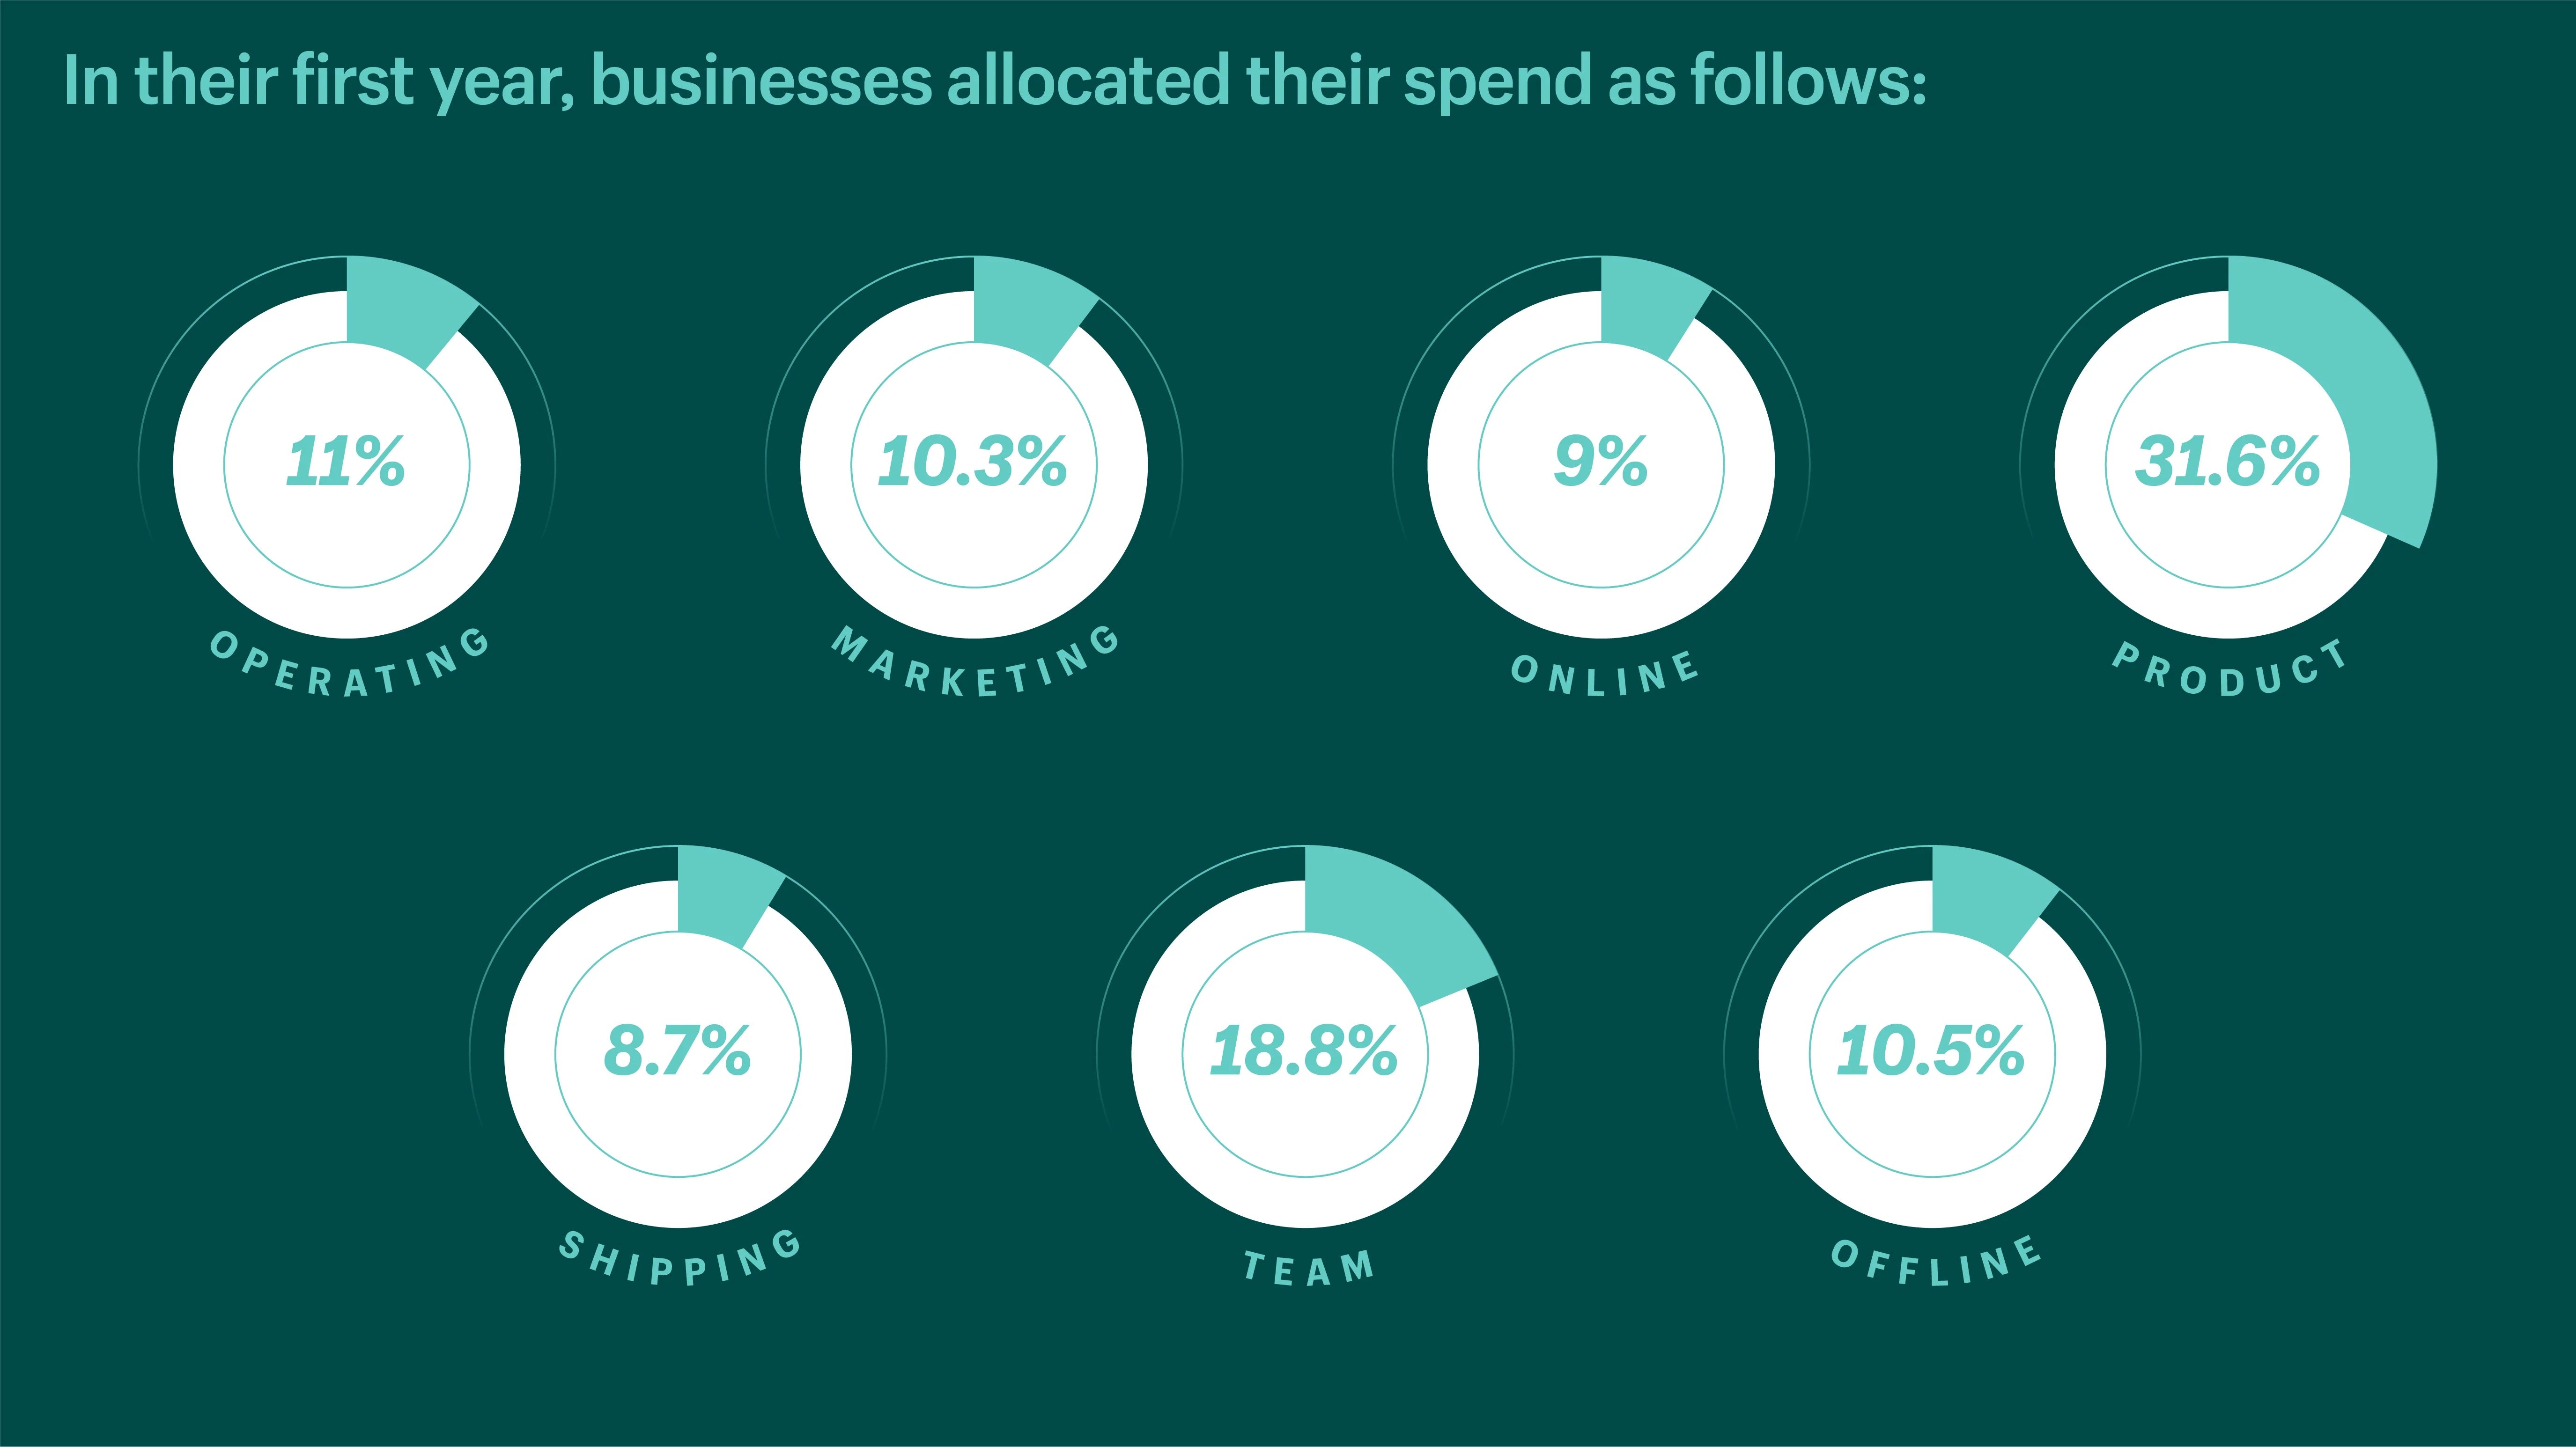 Data visualization depicting 7 categories where entrepreneurs spend the most money in their first year of business